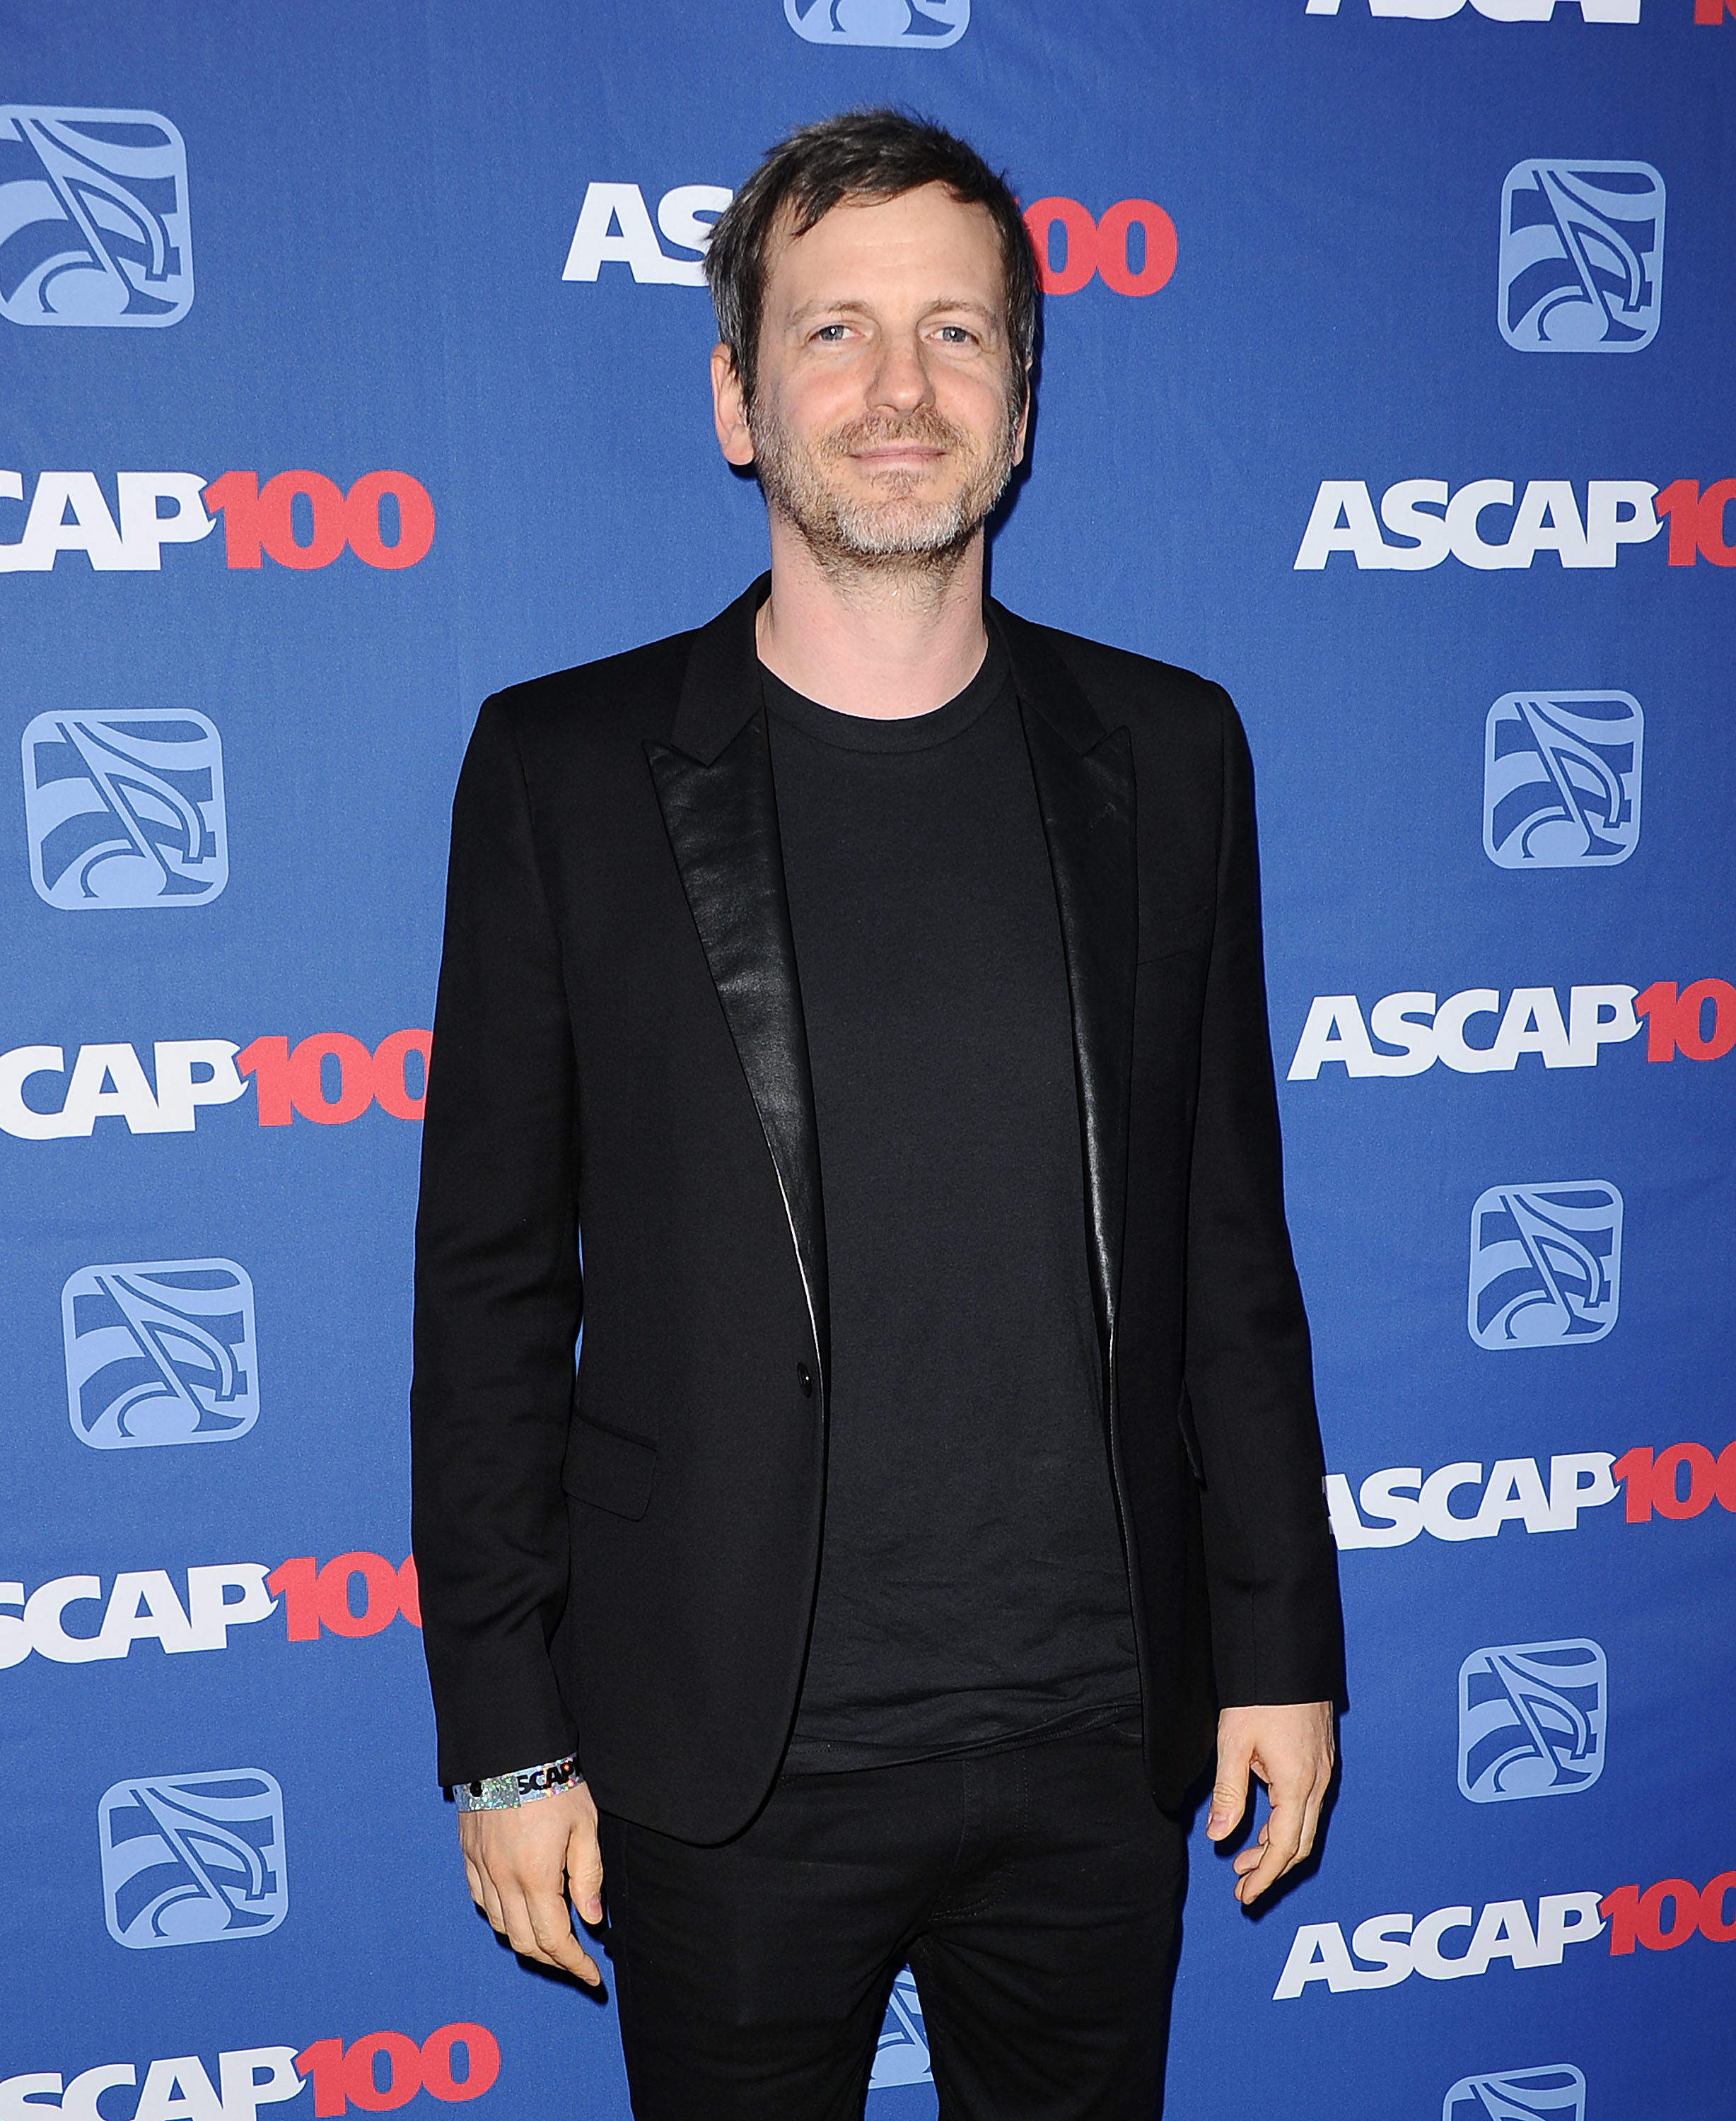 Dr. Luke at an ASCAP event, wearing a black suit with a t-shirt underneath, standing in front of a blue backdrop with ASCAP 100 logos